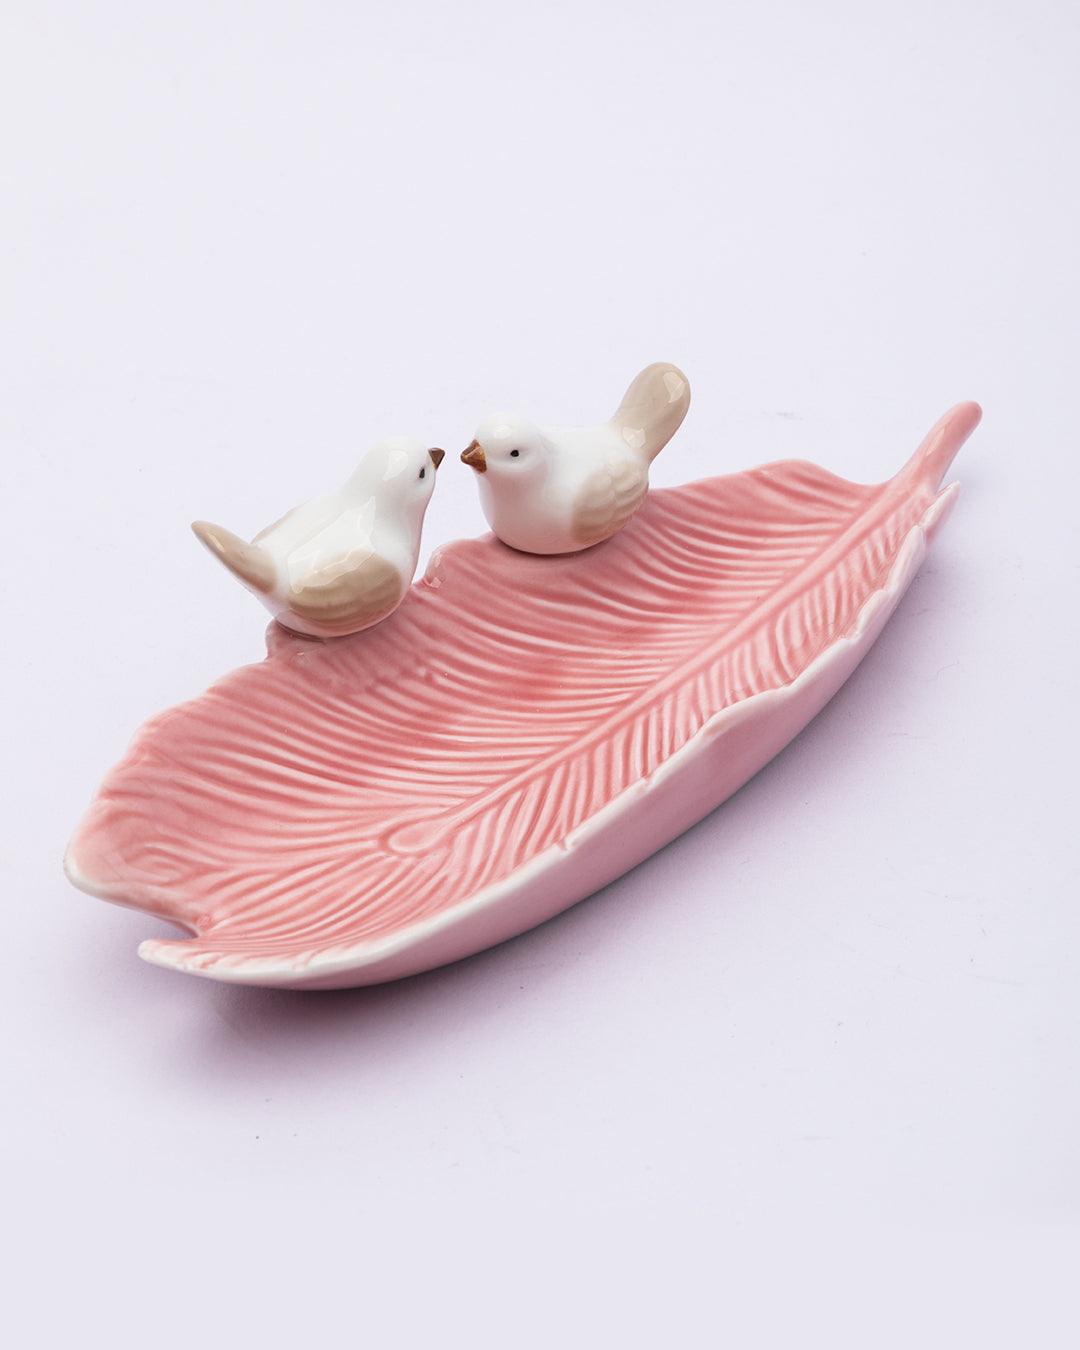 Jewellery Holder Tray, Crafted Bird, for Dressing Table, Ring Dash, Rectangular, Pink, Ceramic - MARKET 99